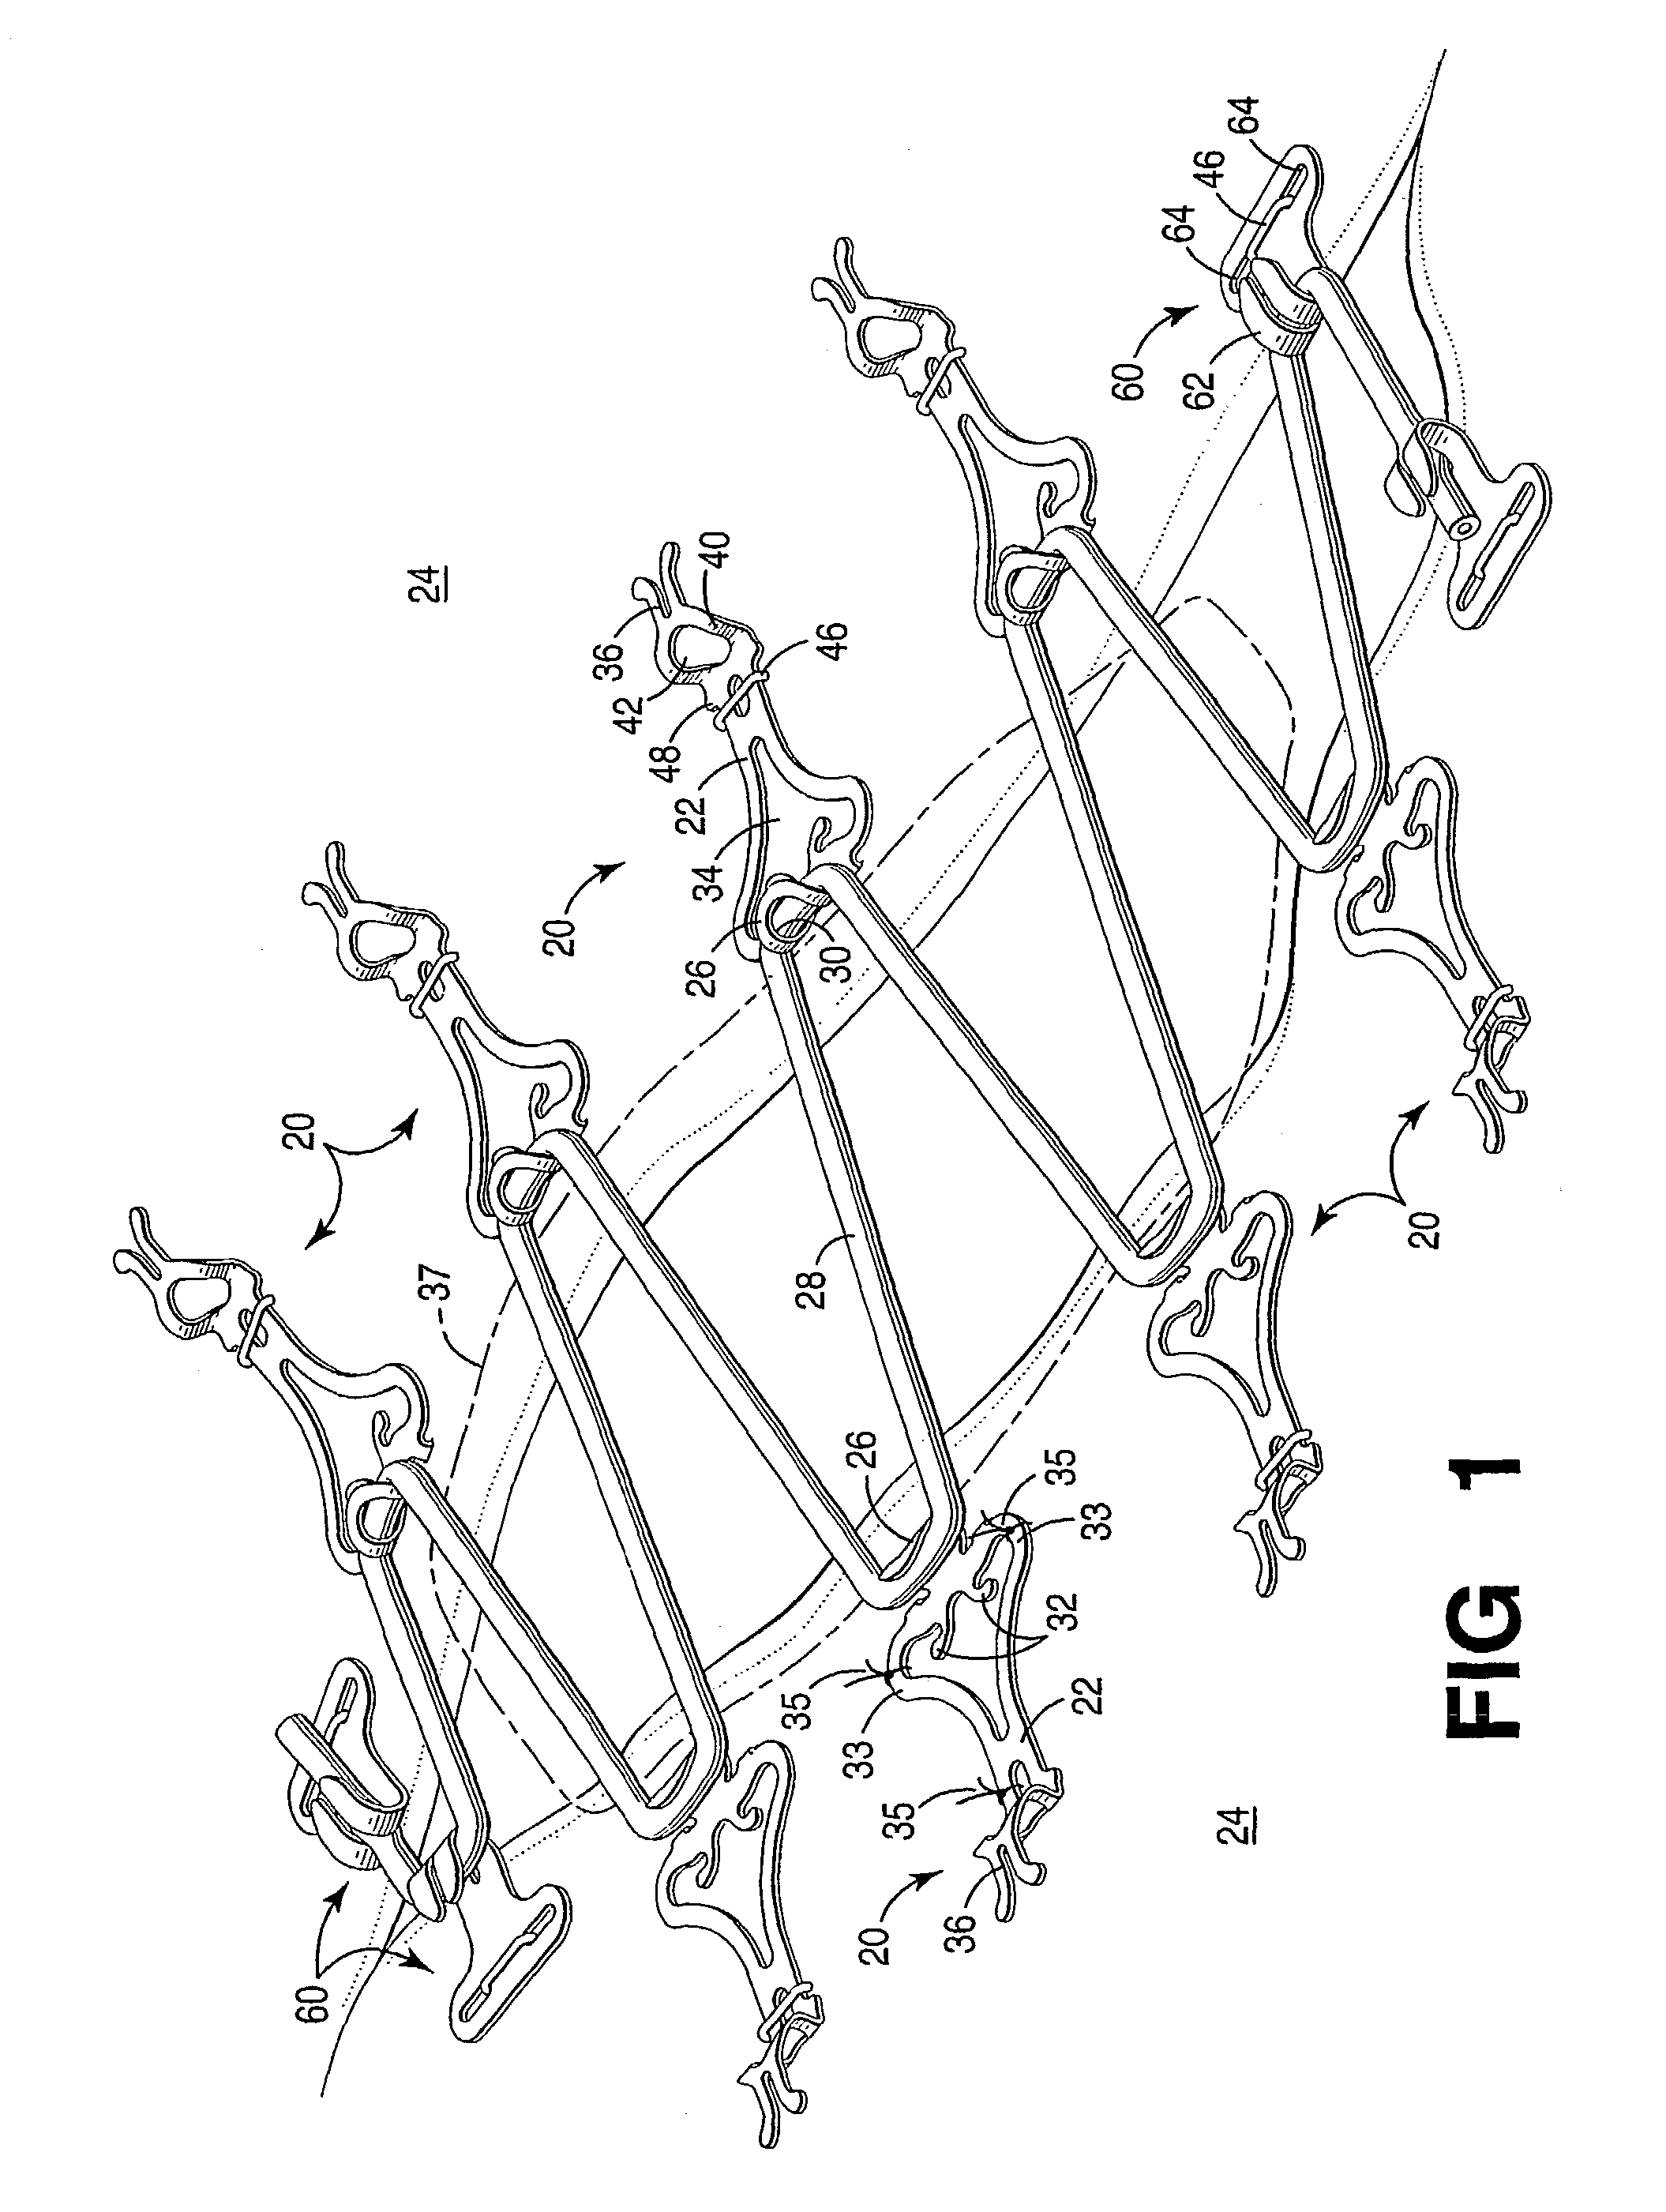 System and method for moving and stretching plastic tissue